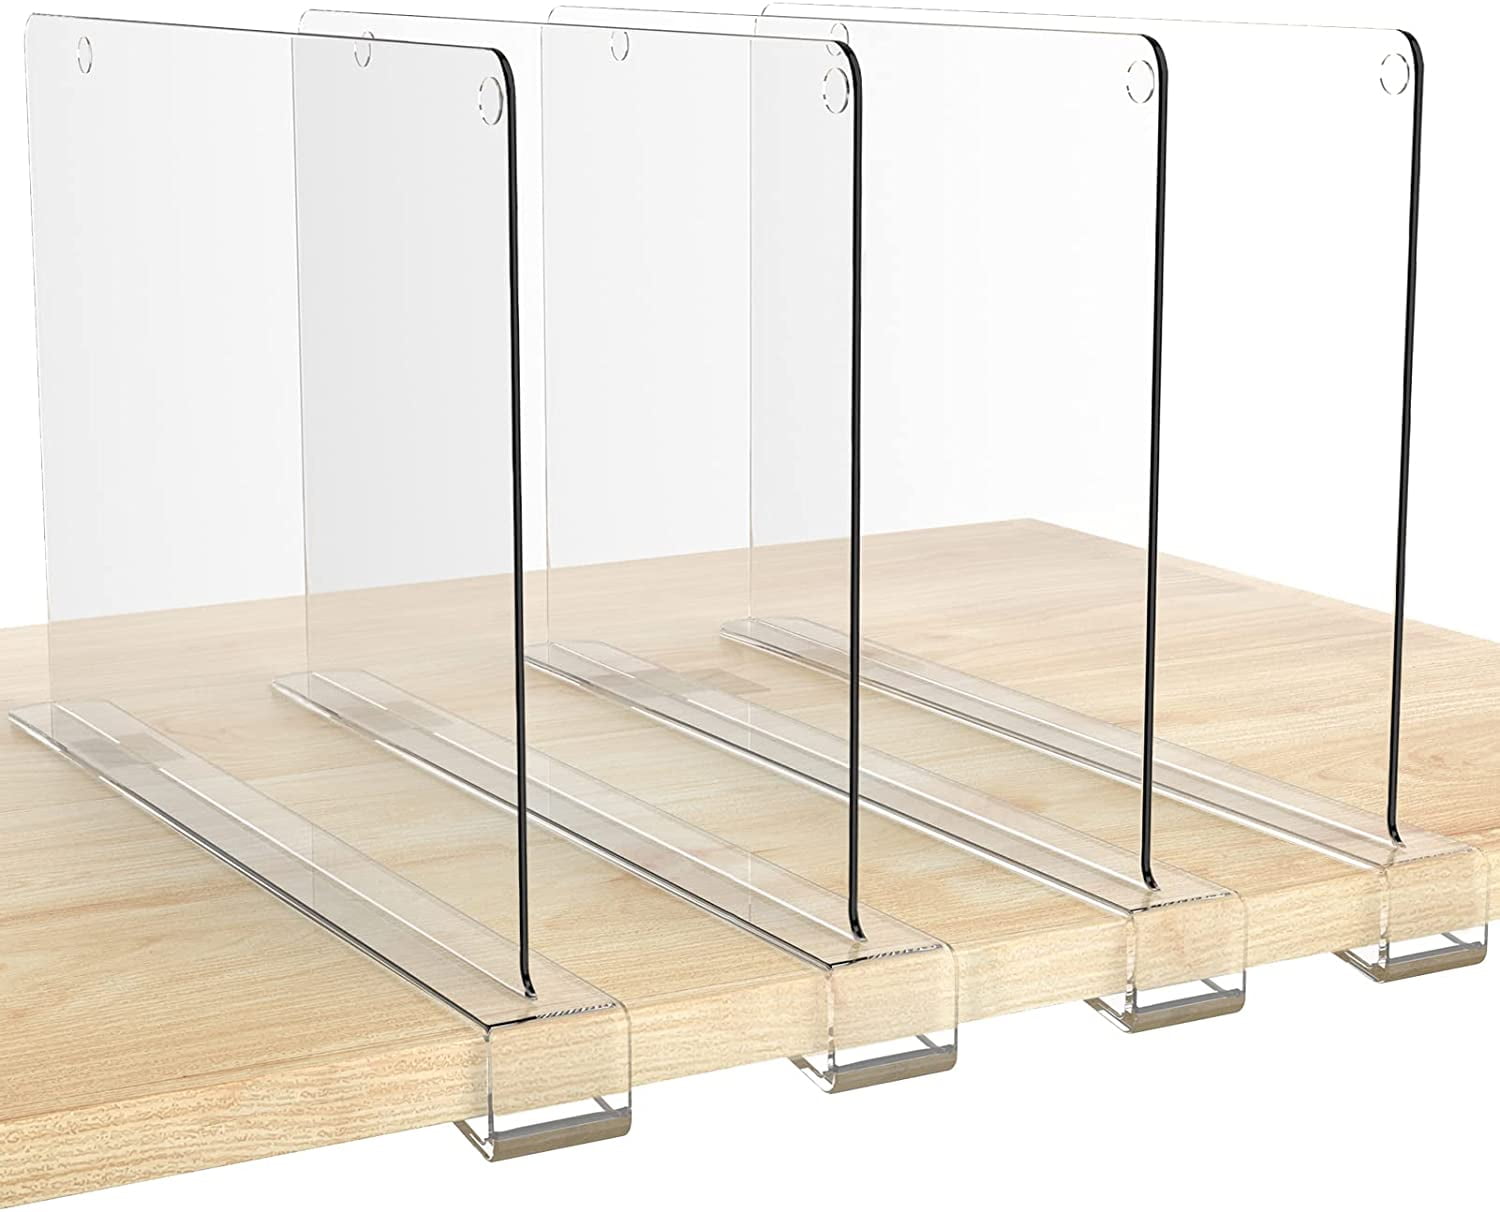 GCP Products 6 Pack Closet Shelves, Shelf Dividers, Clear Acrylic